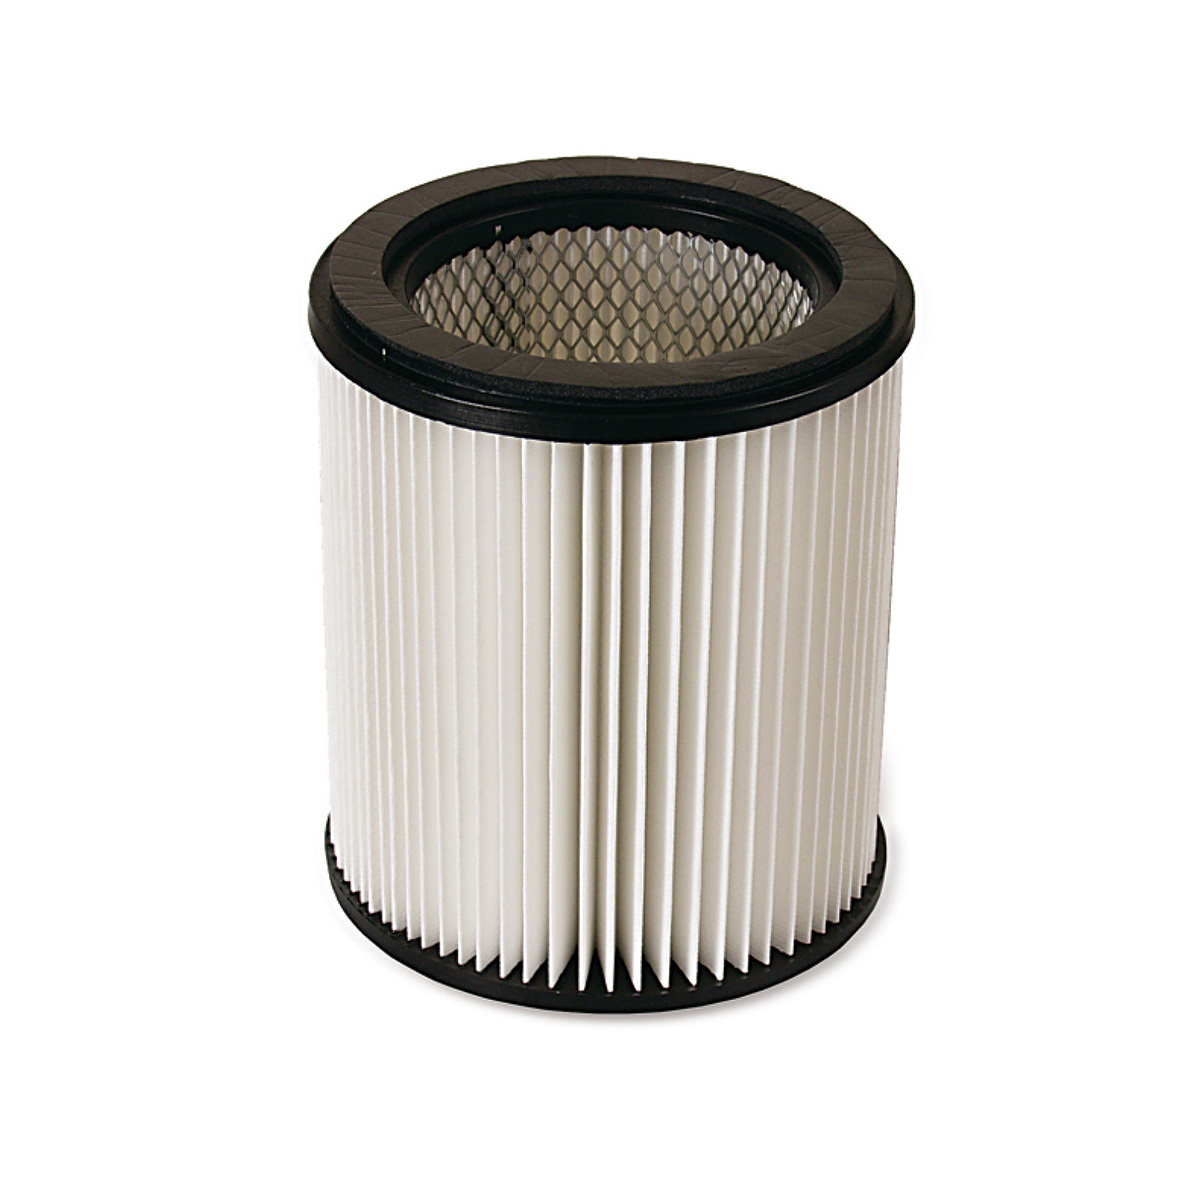 Cartridge Filter for AC-13 or AC-18 Wet/Dry Vacuums (19-0230)